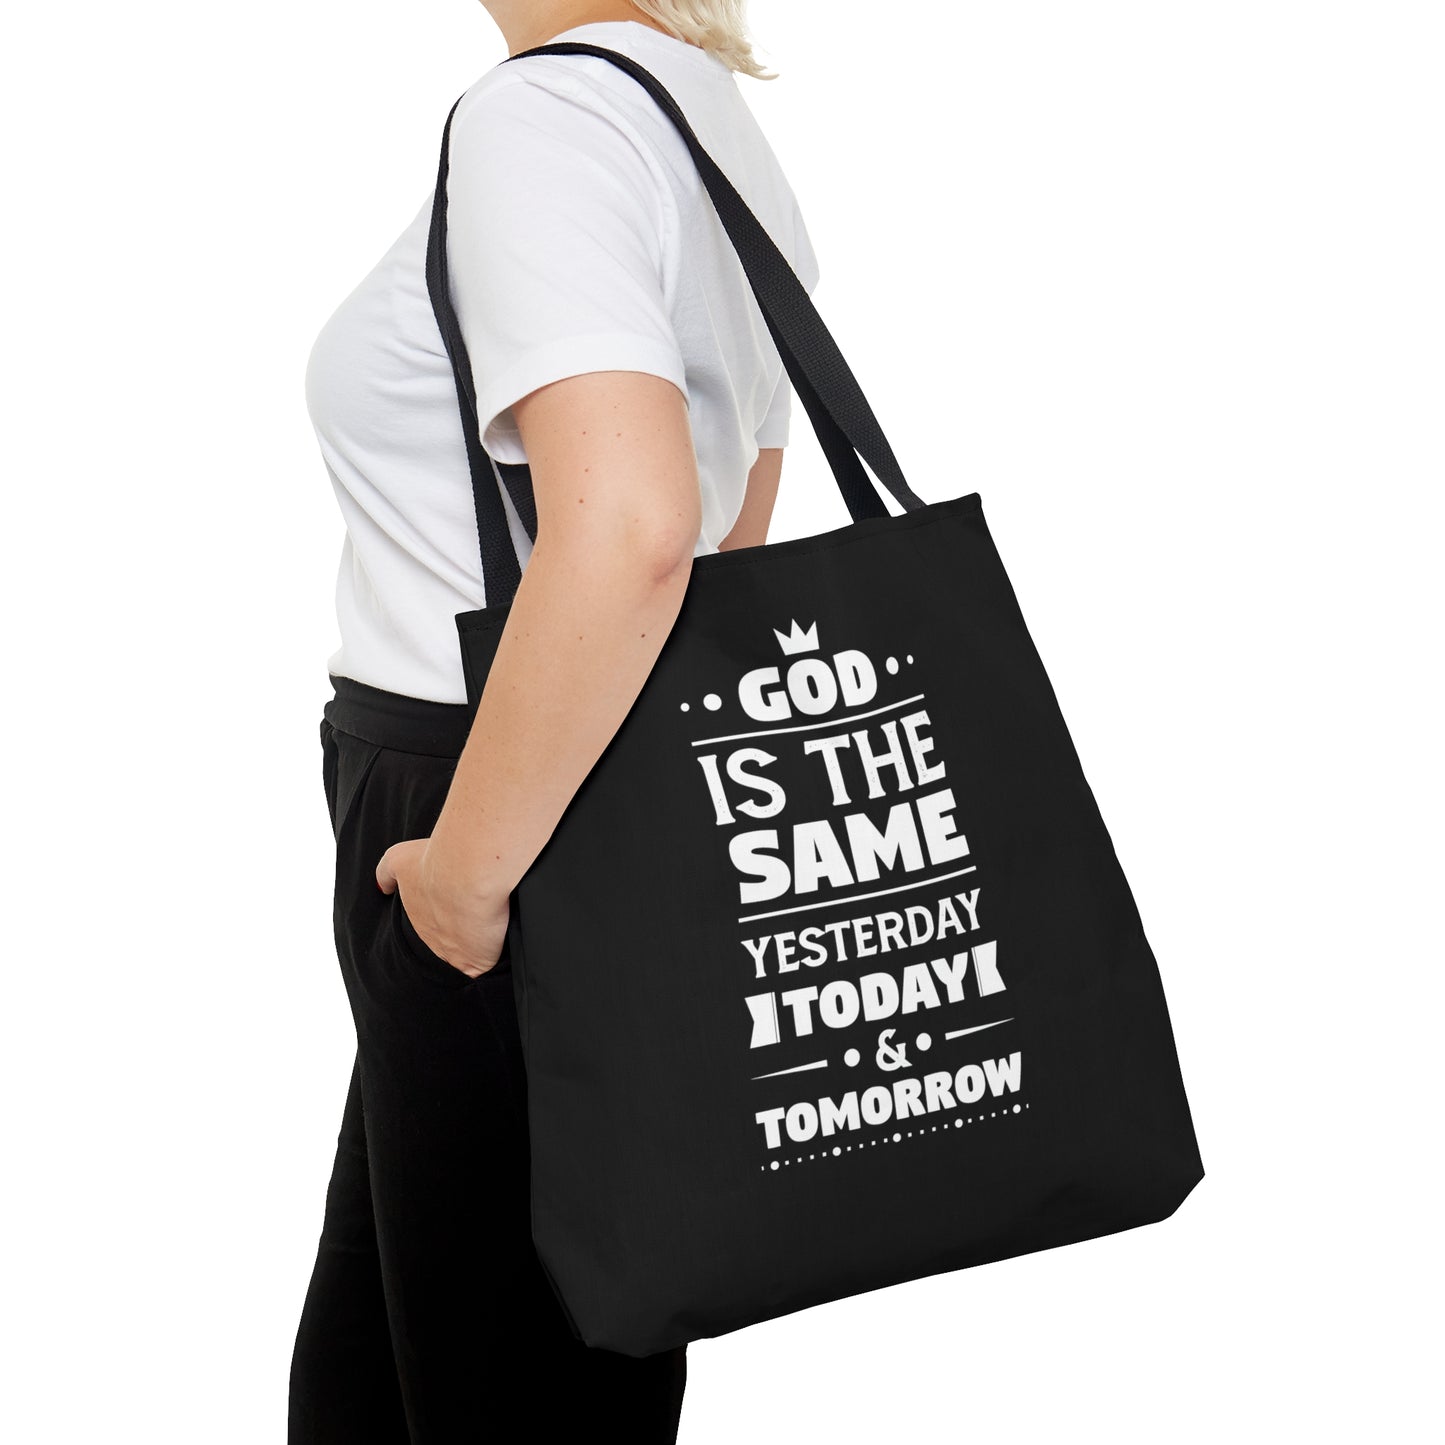 God Is The Same Yesterday Today & Tomorrow Tote Bag